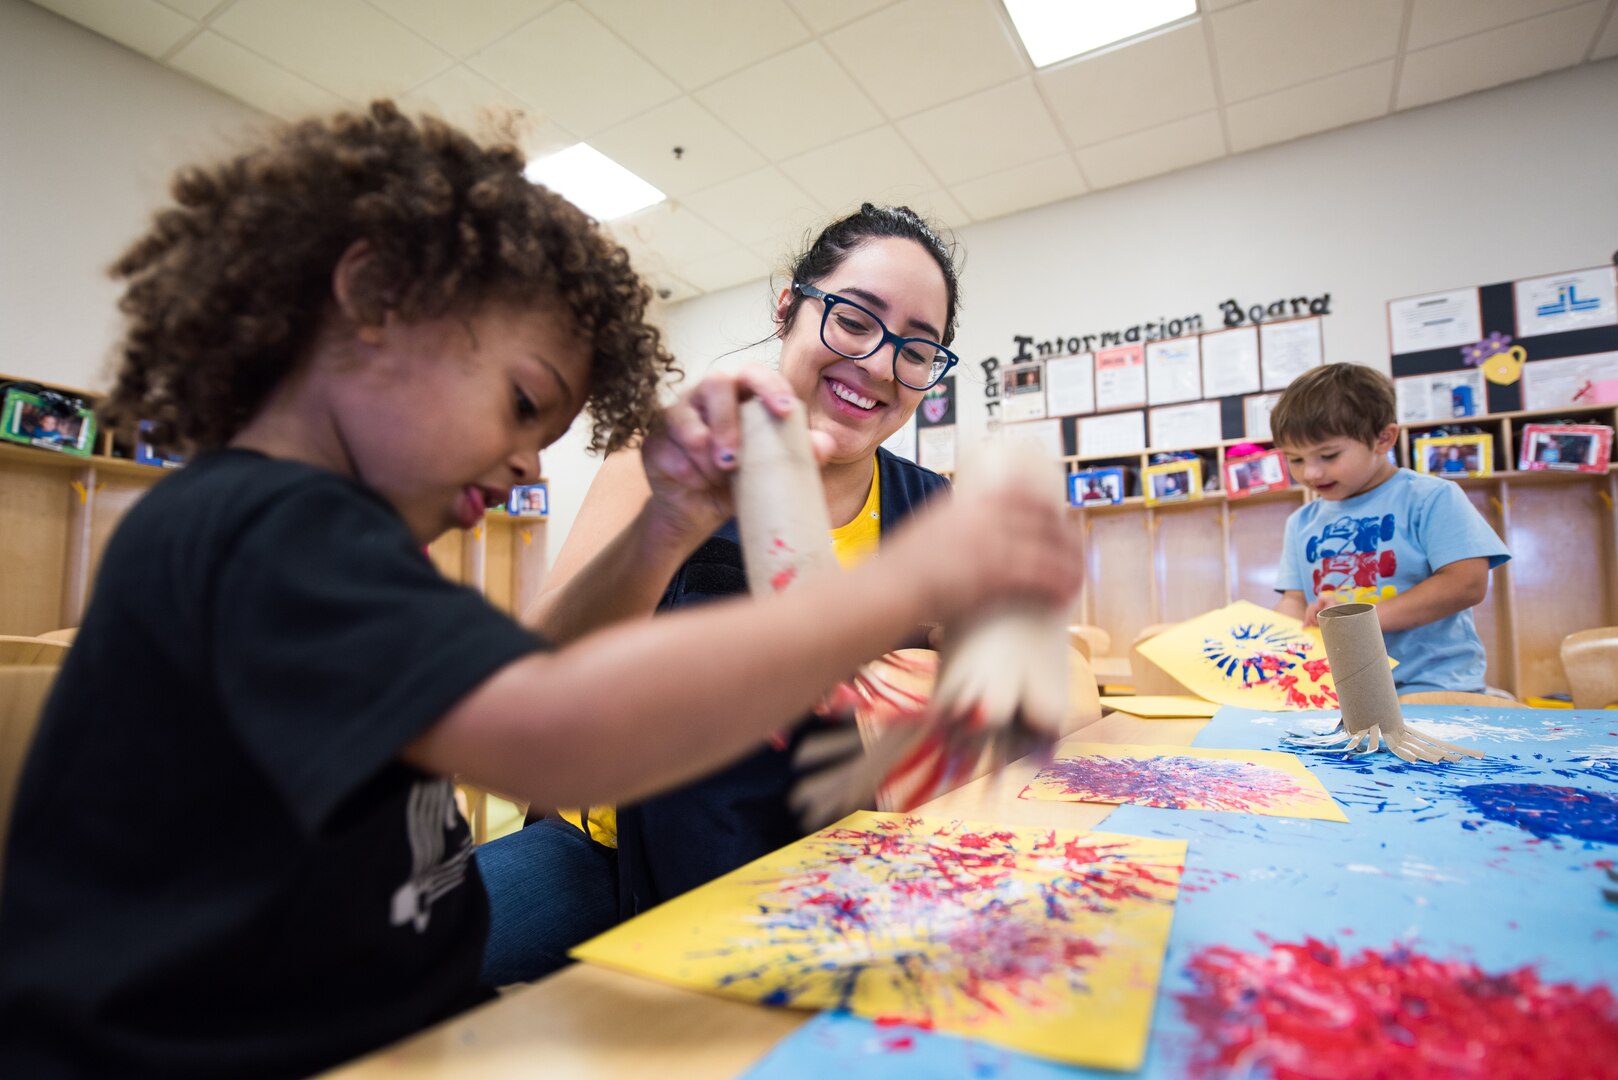 Stephanie Salazar, 502nd Force Support Squadron, child development program assistant, helps kids create a fire work painting, June 11, 2019, at the Gateway Child Development Center, Joint Base San Antonio-Lackland, Texas.